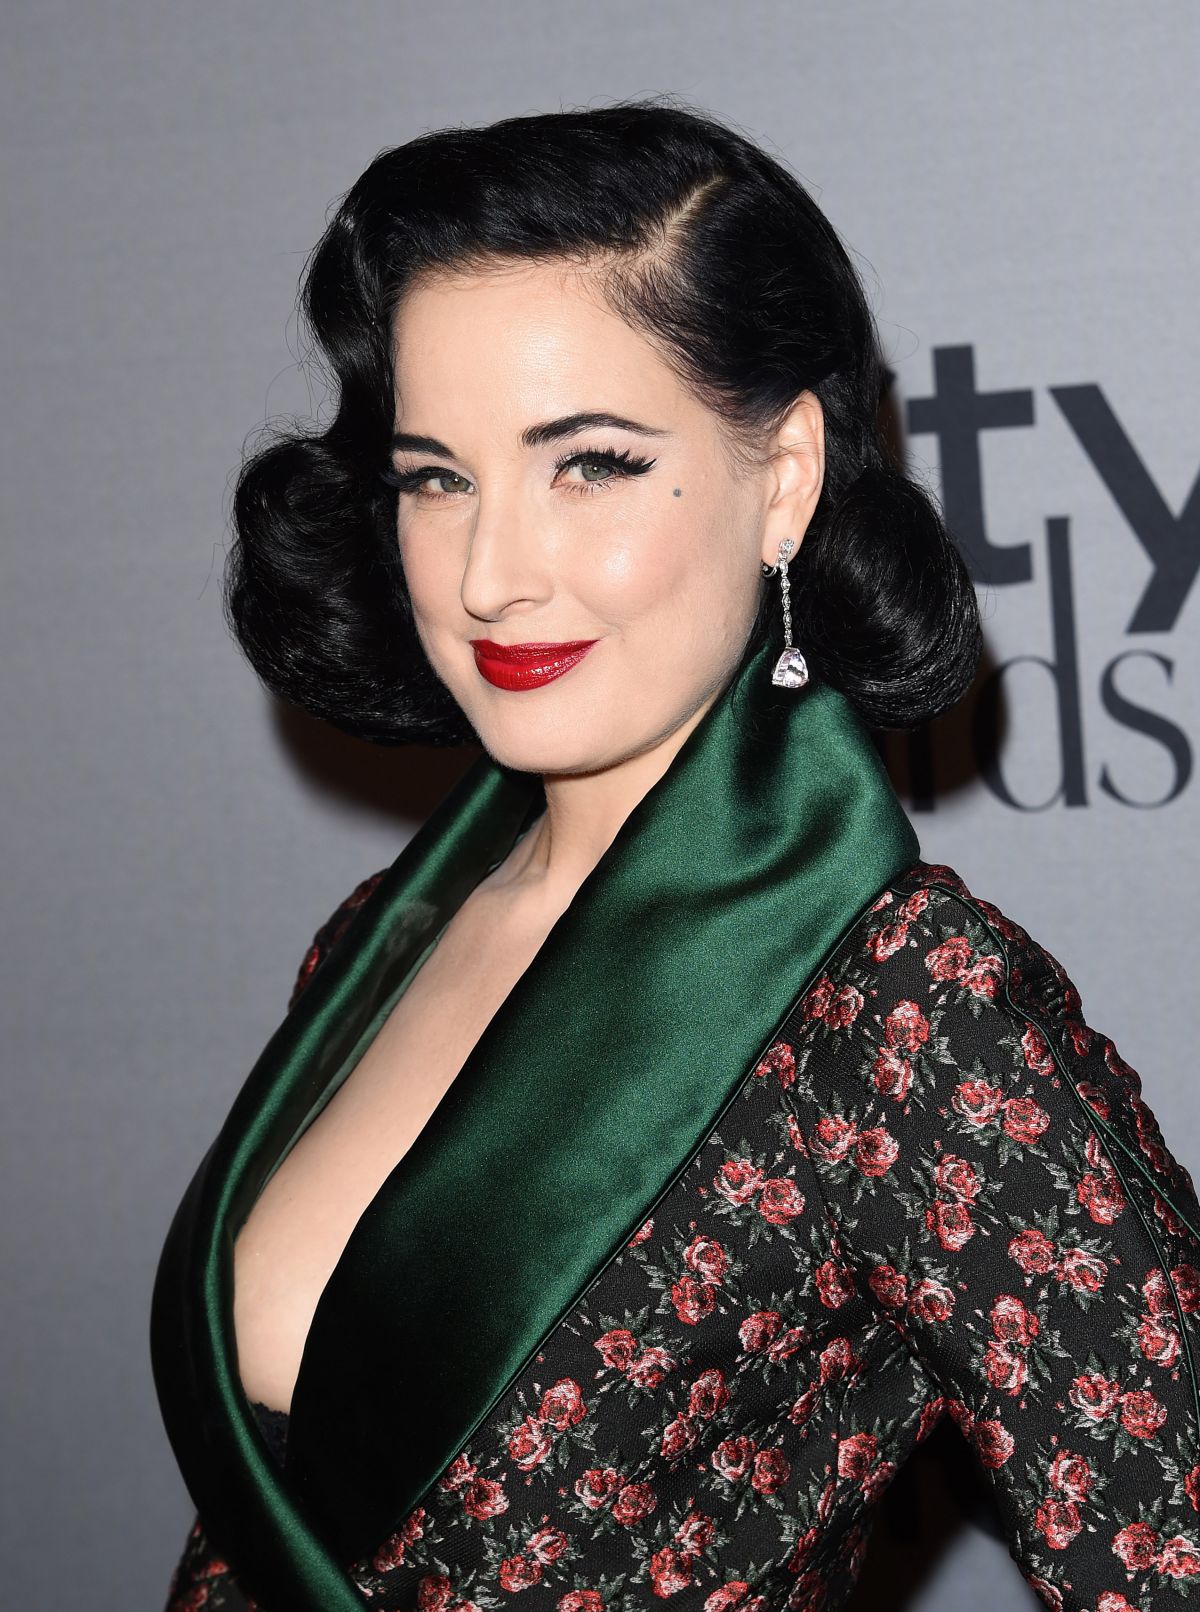 DITA VON TEESE at 2nd Annual Instyle Awards in Los Angeles 10/24/2016